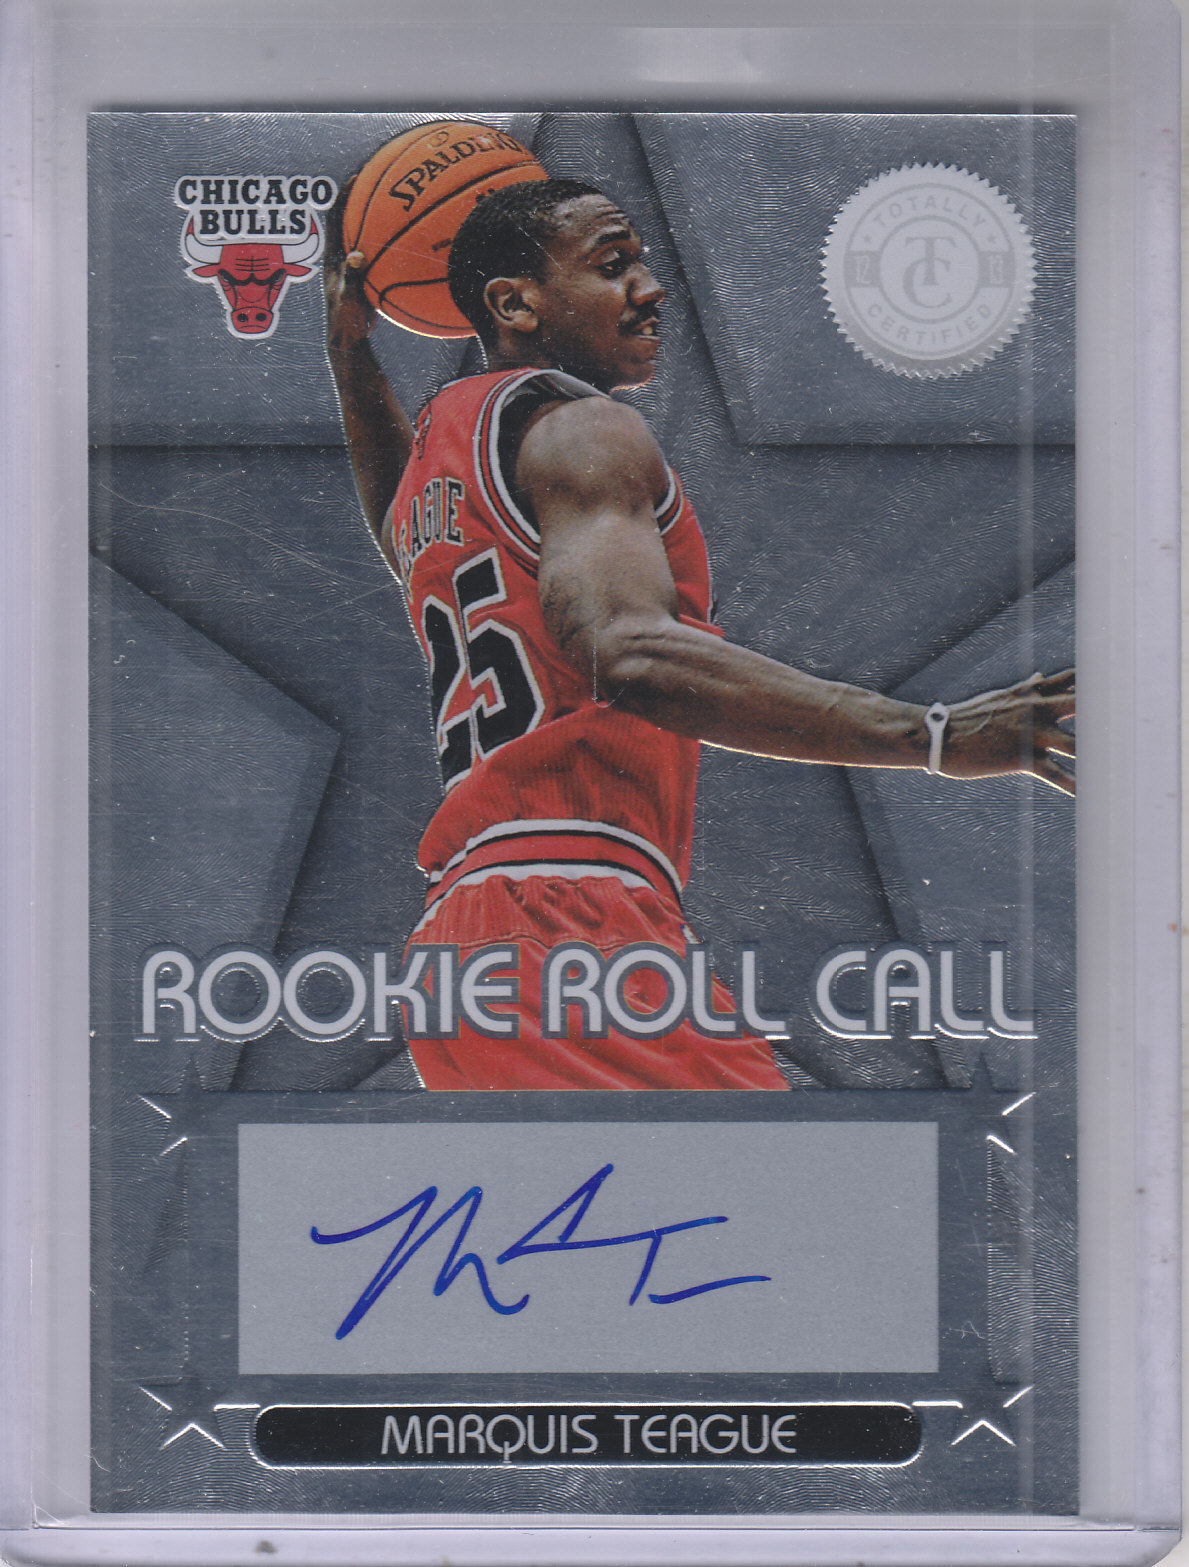 2012-13 Totally Certified Rookie Roll Call Autographs #60 Marquis Teague